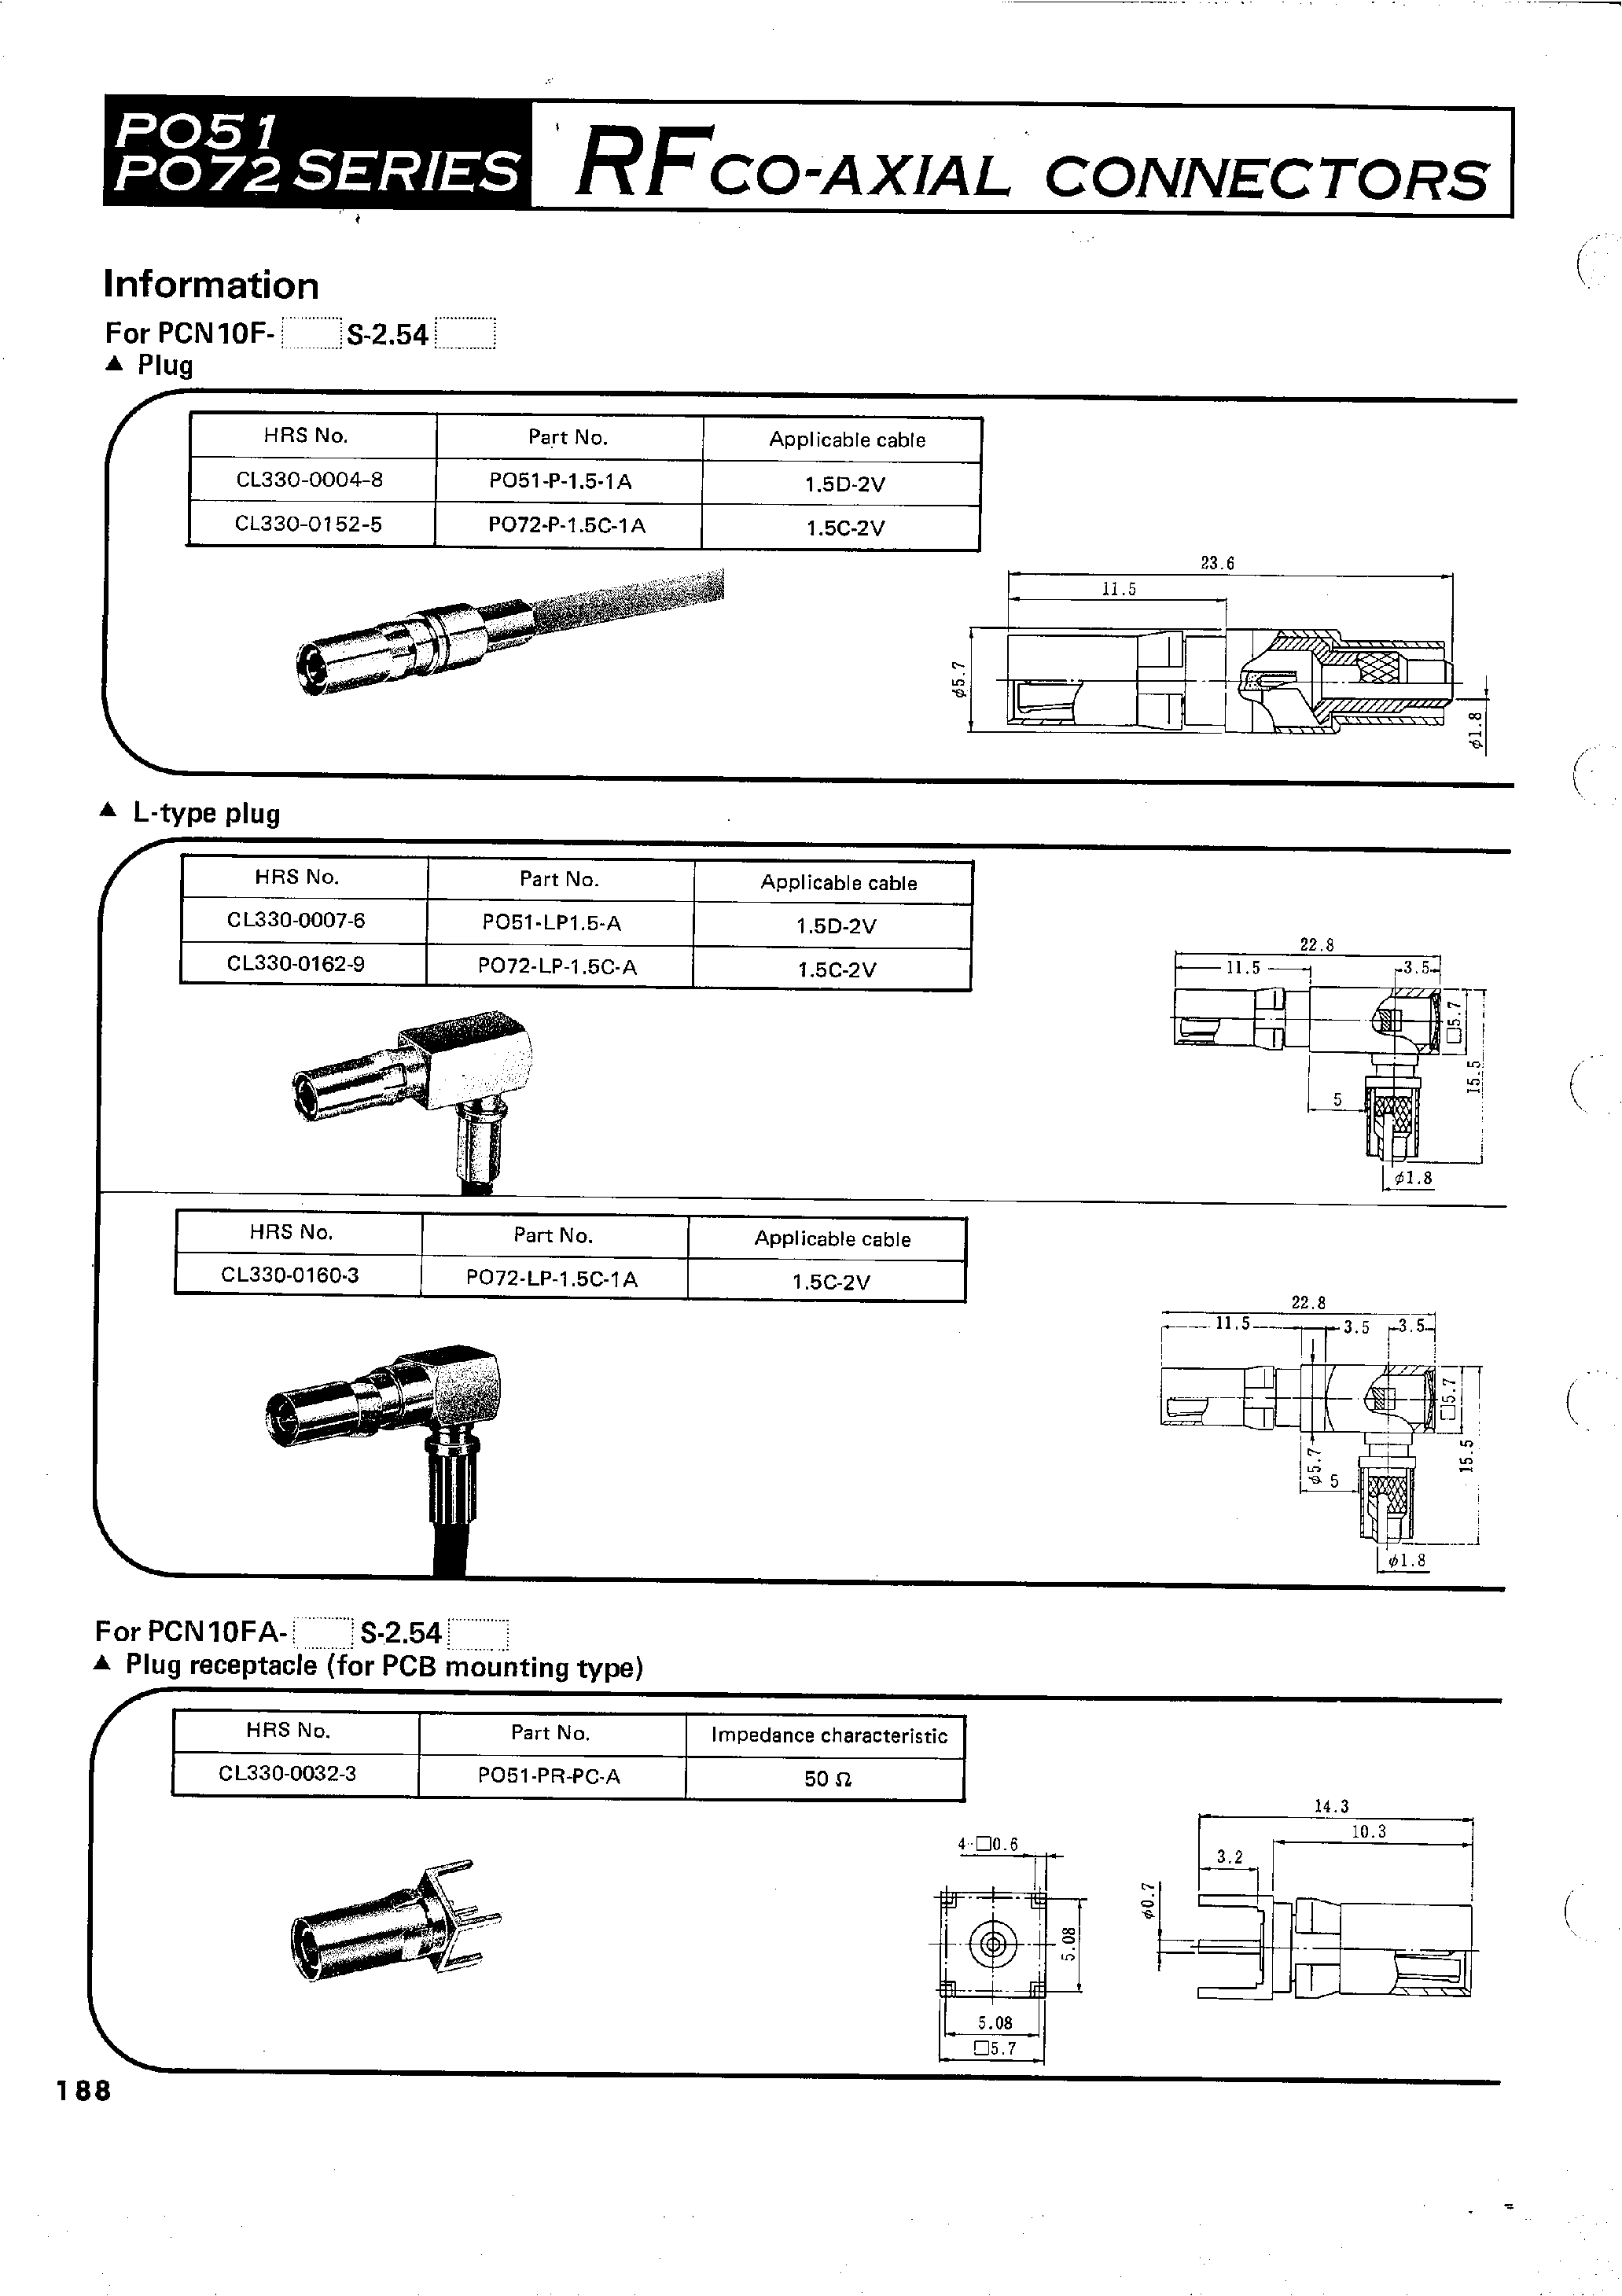 Datasheet PO51P-T-1 - RFCO-AXIAL CONNECTORS page 2